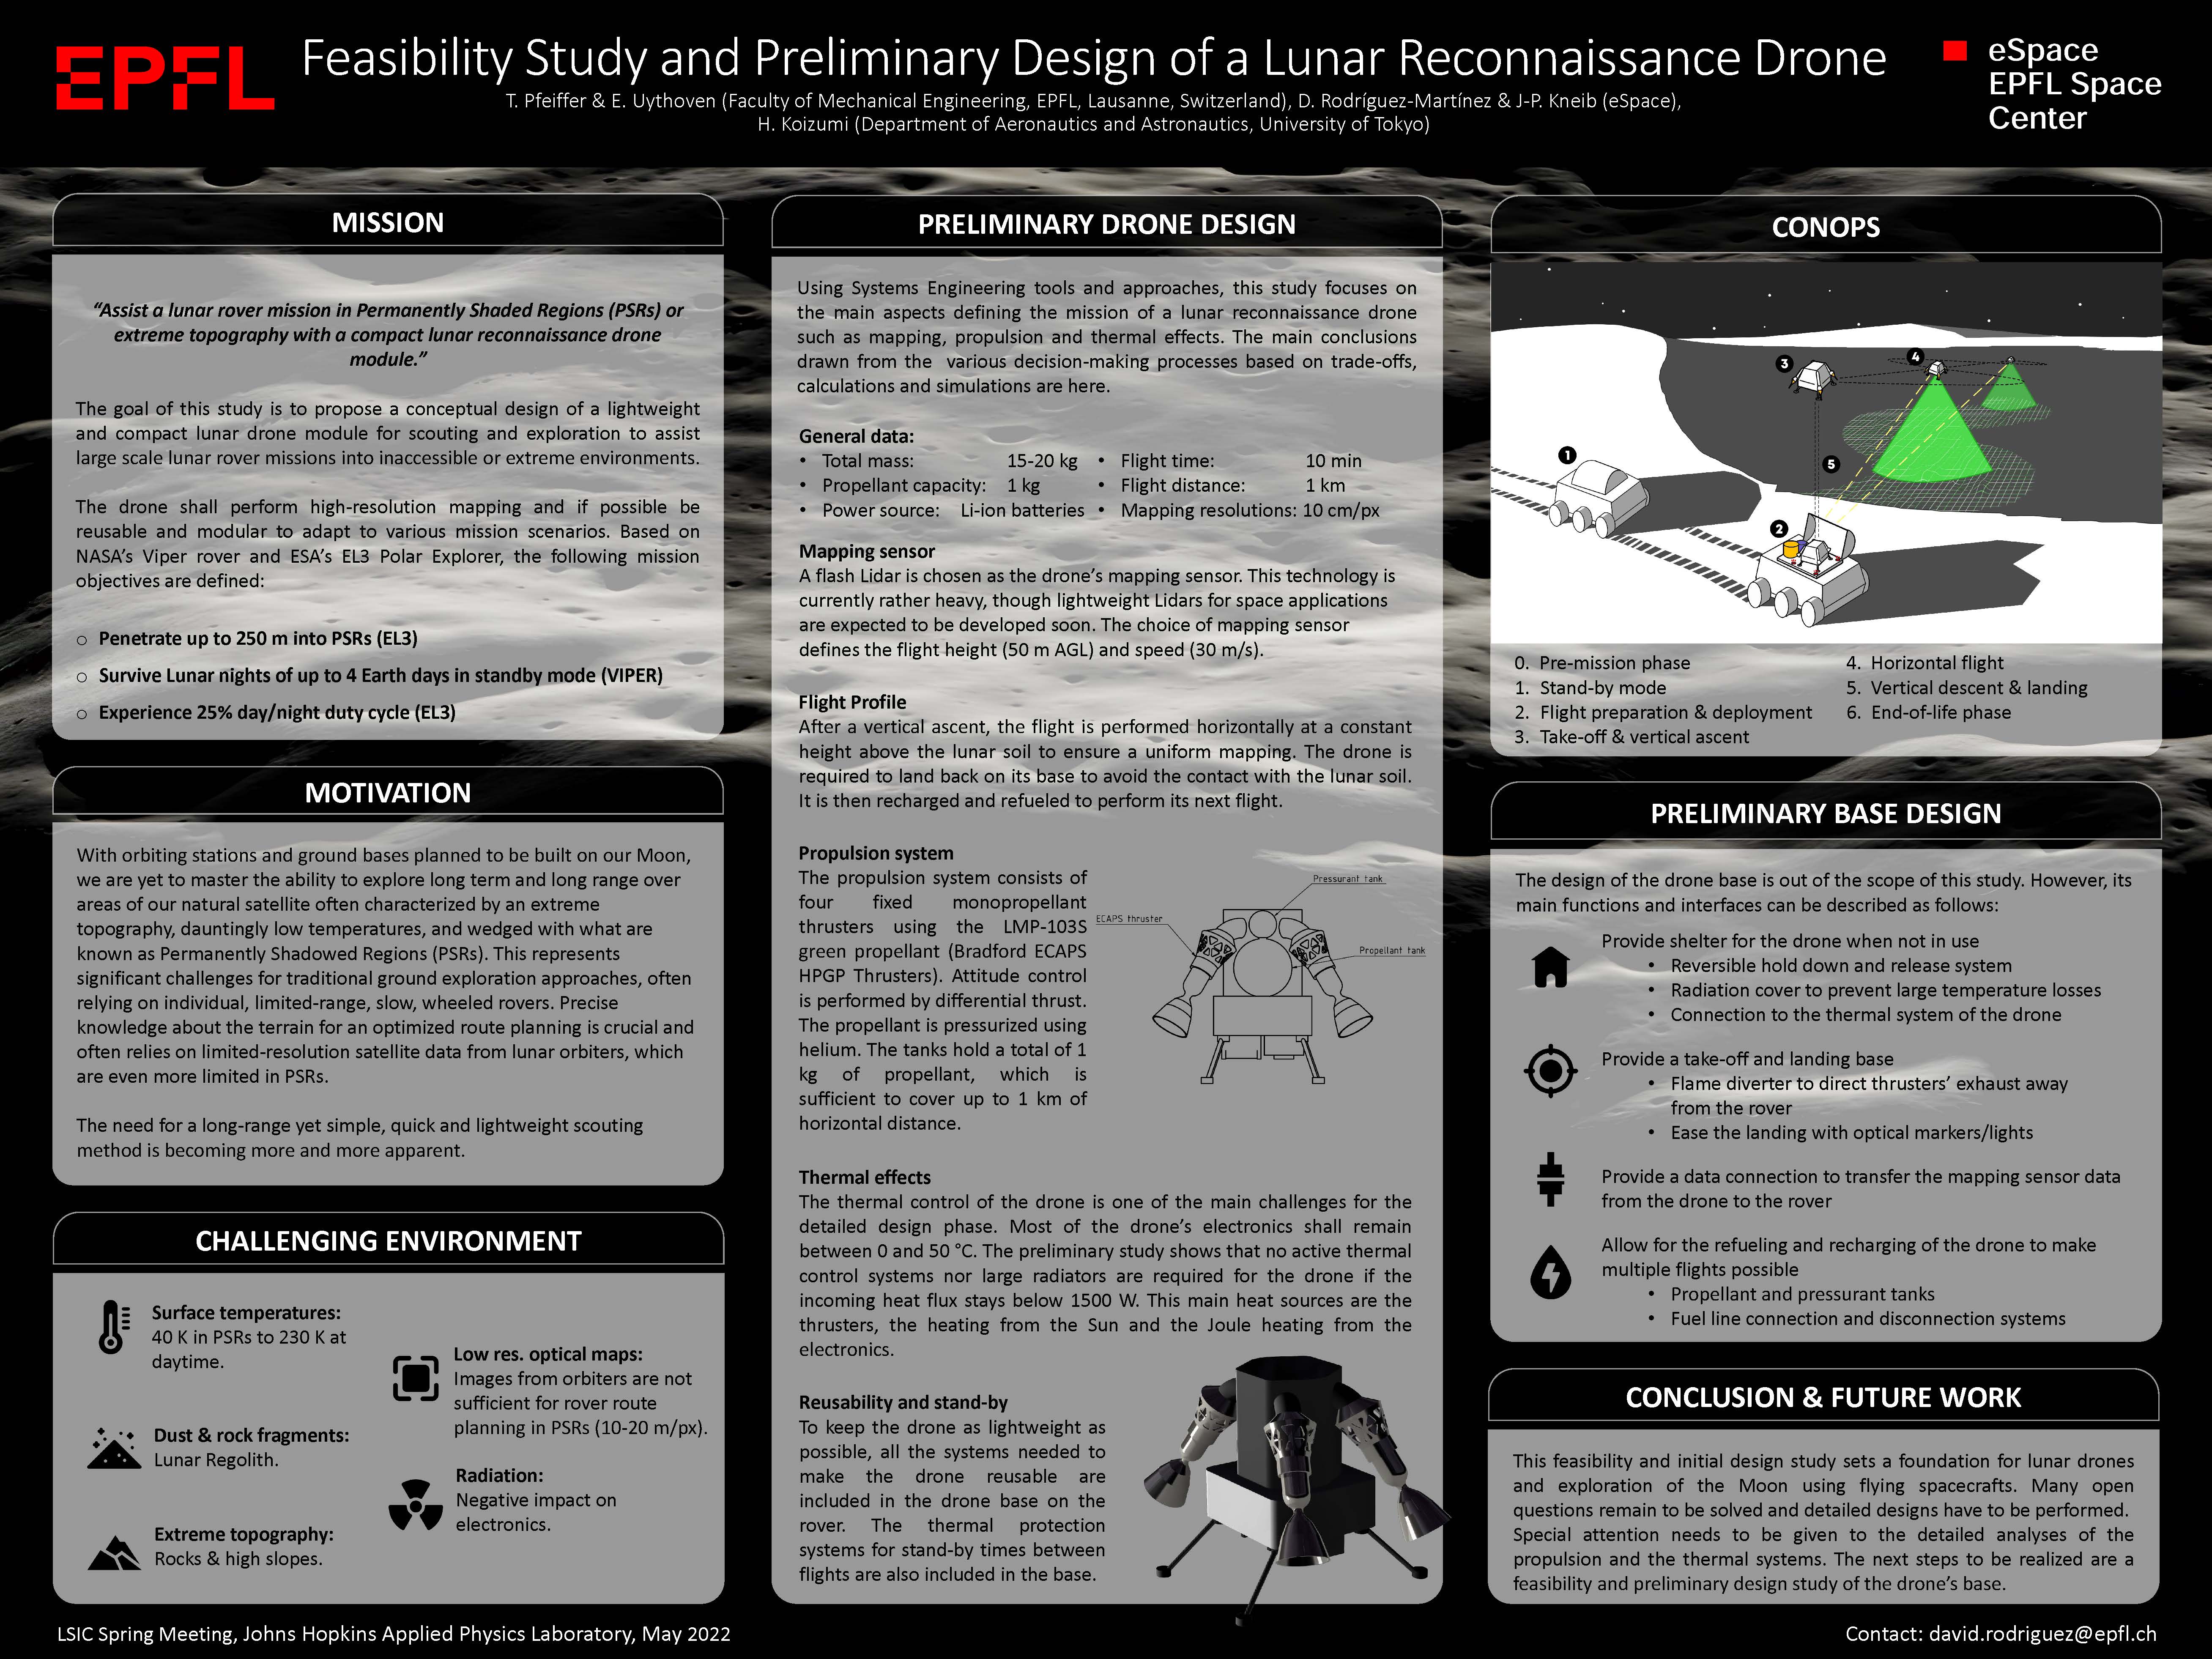 Feasibility Study and Preliminary Design of Lunar Reconnaissance Drone